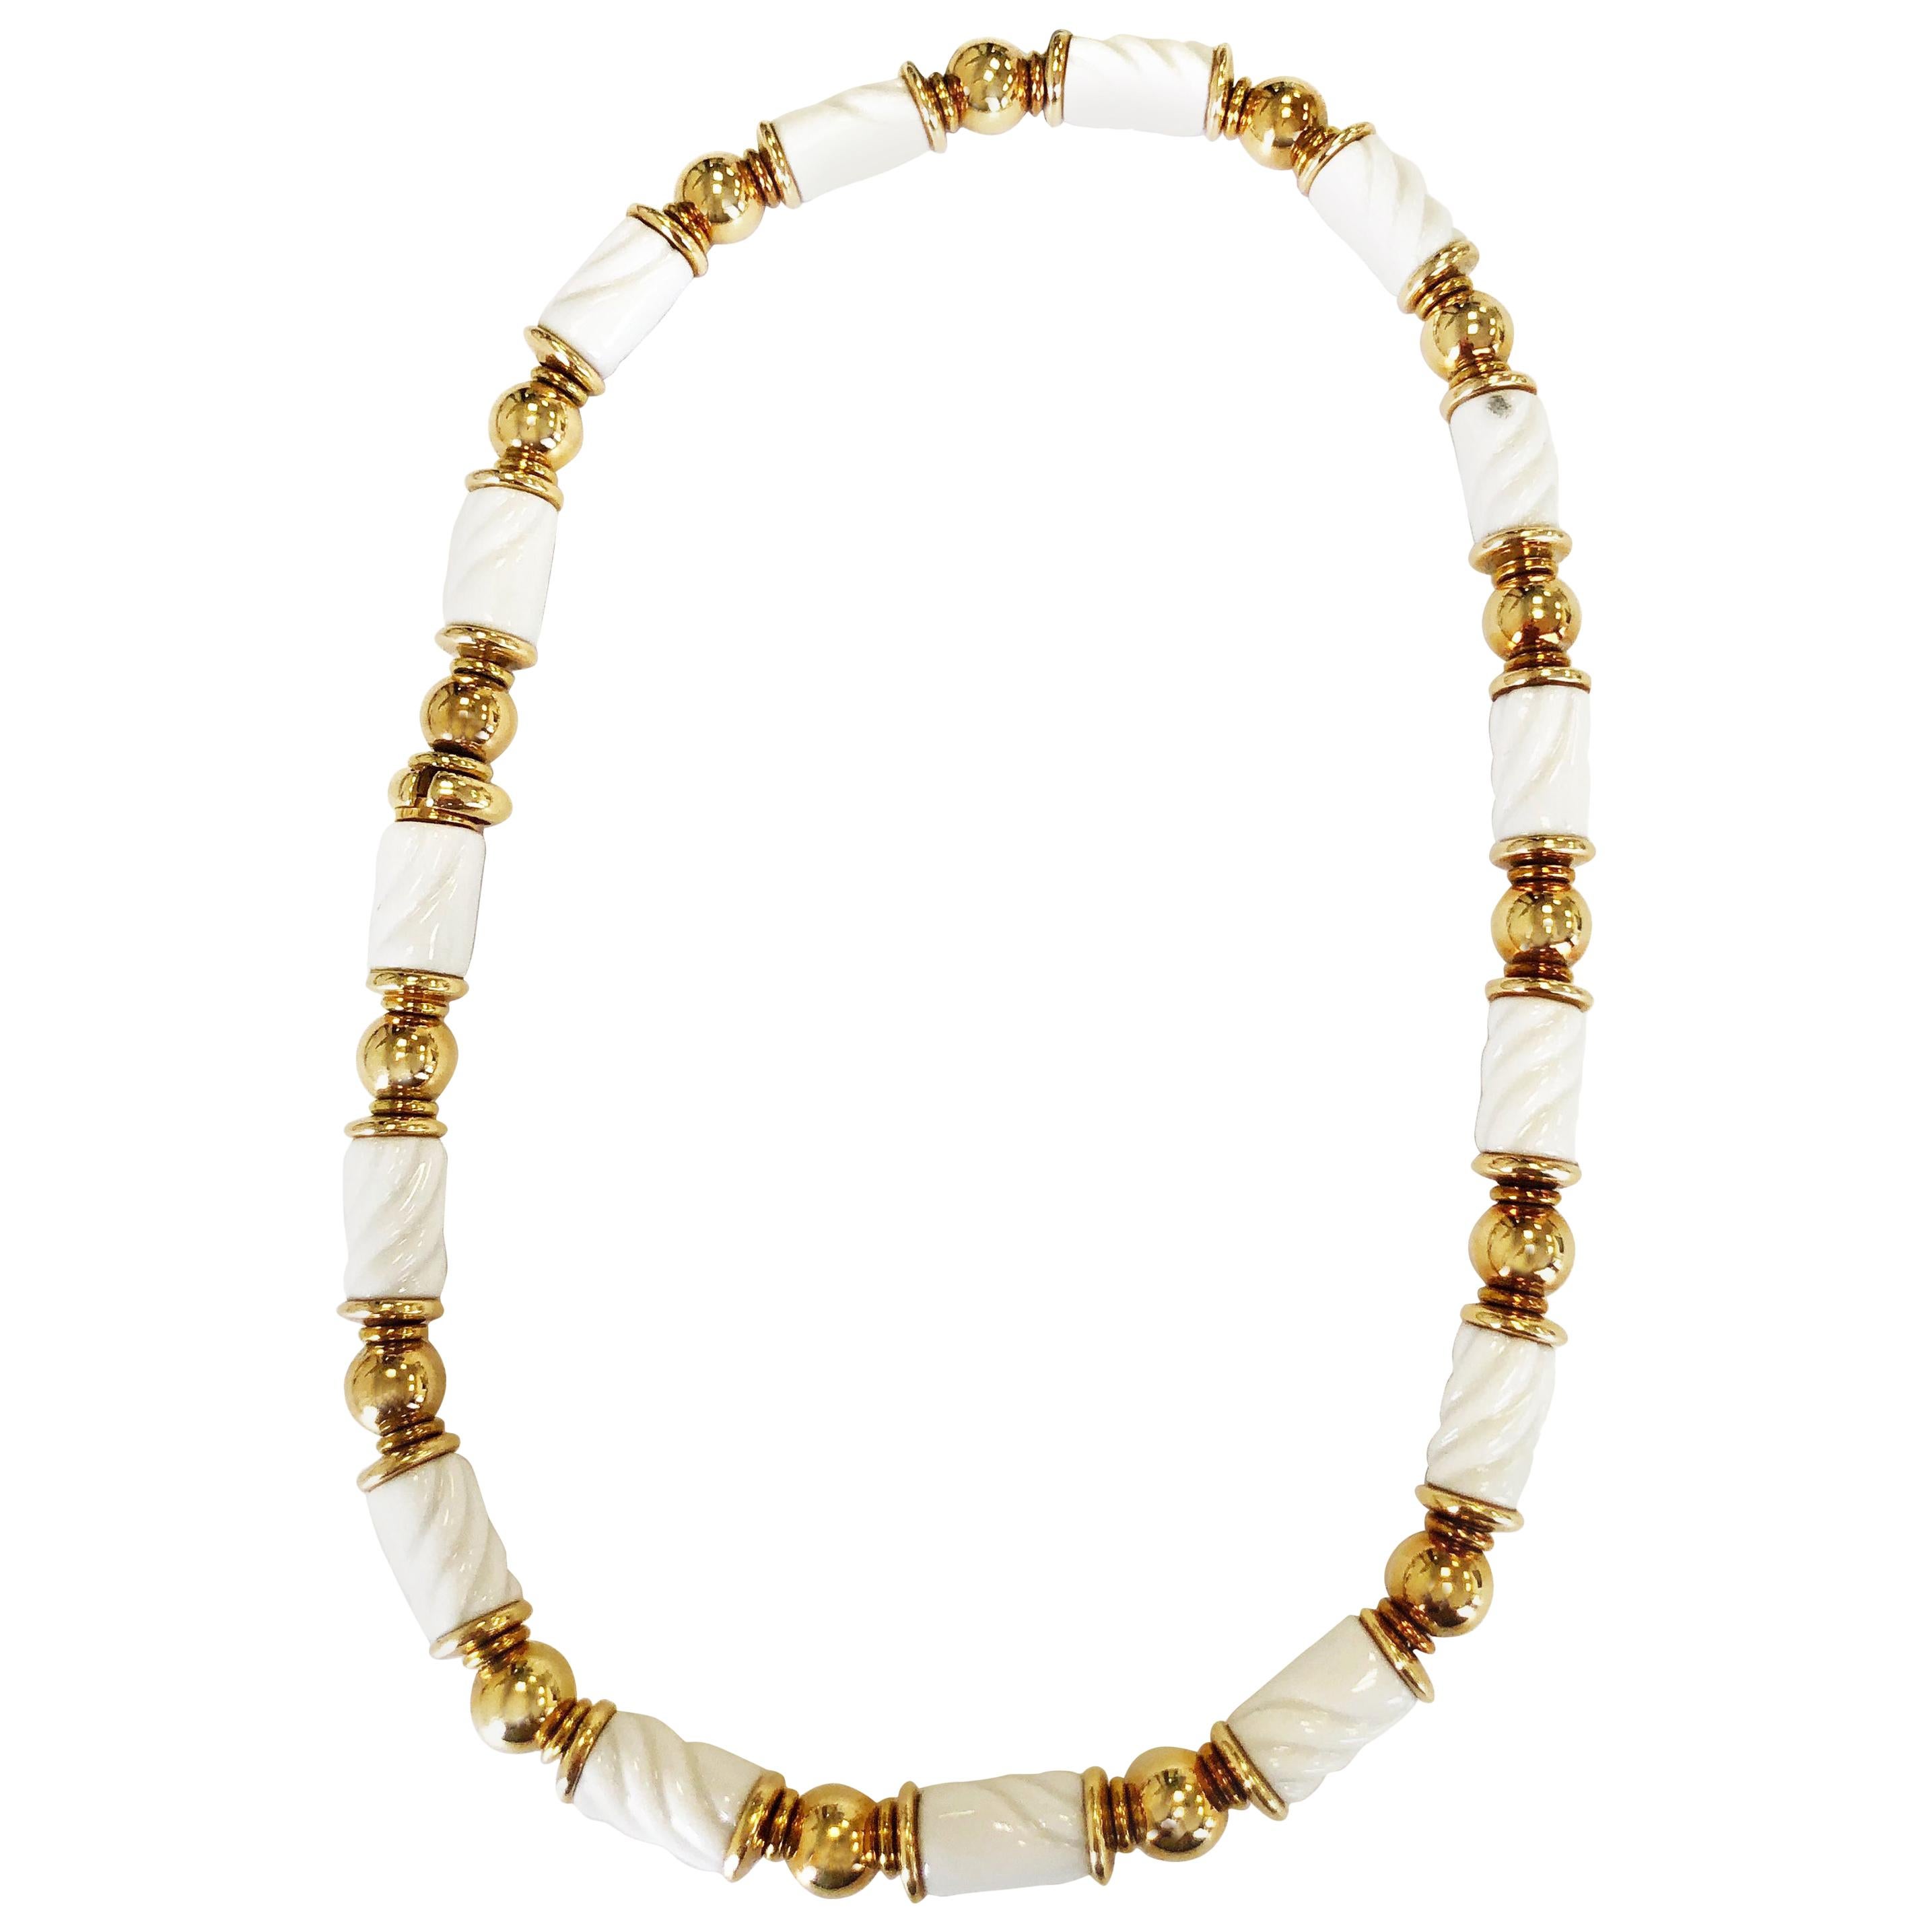 Bvlgari Chandra Carved White Porcelain Necklace in 18 Karat Yellow Gold